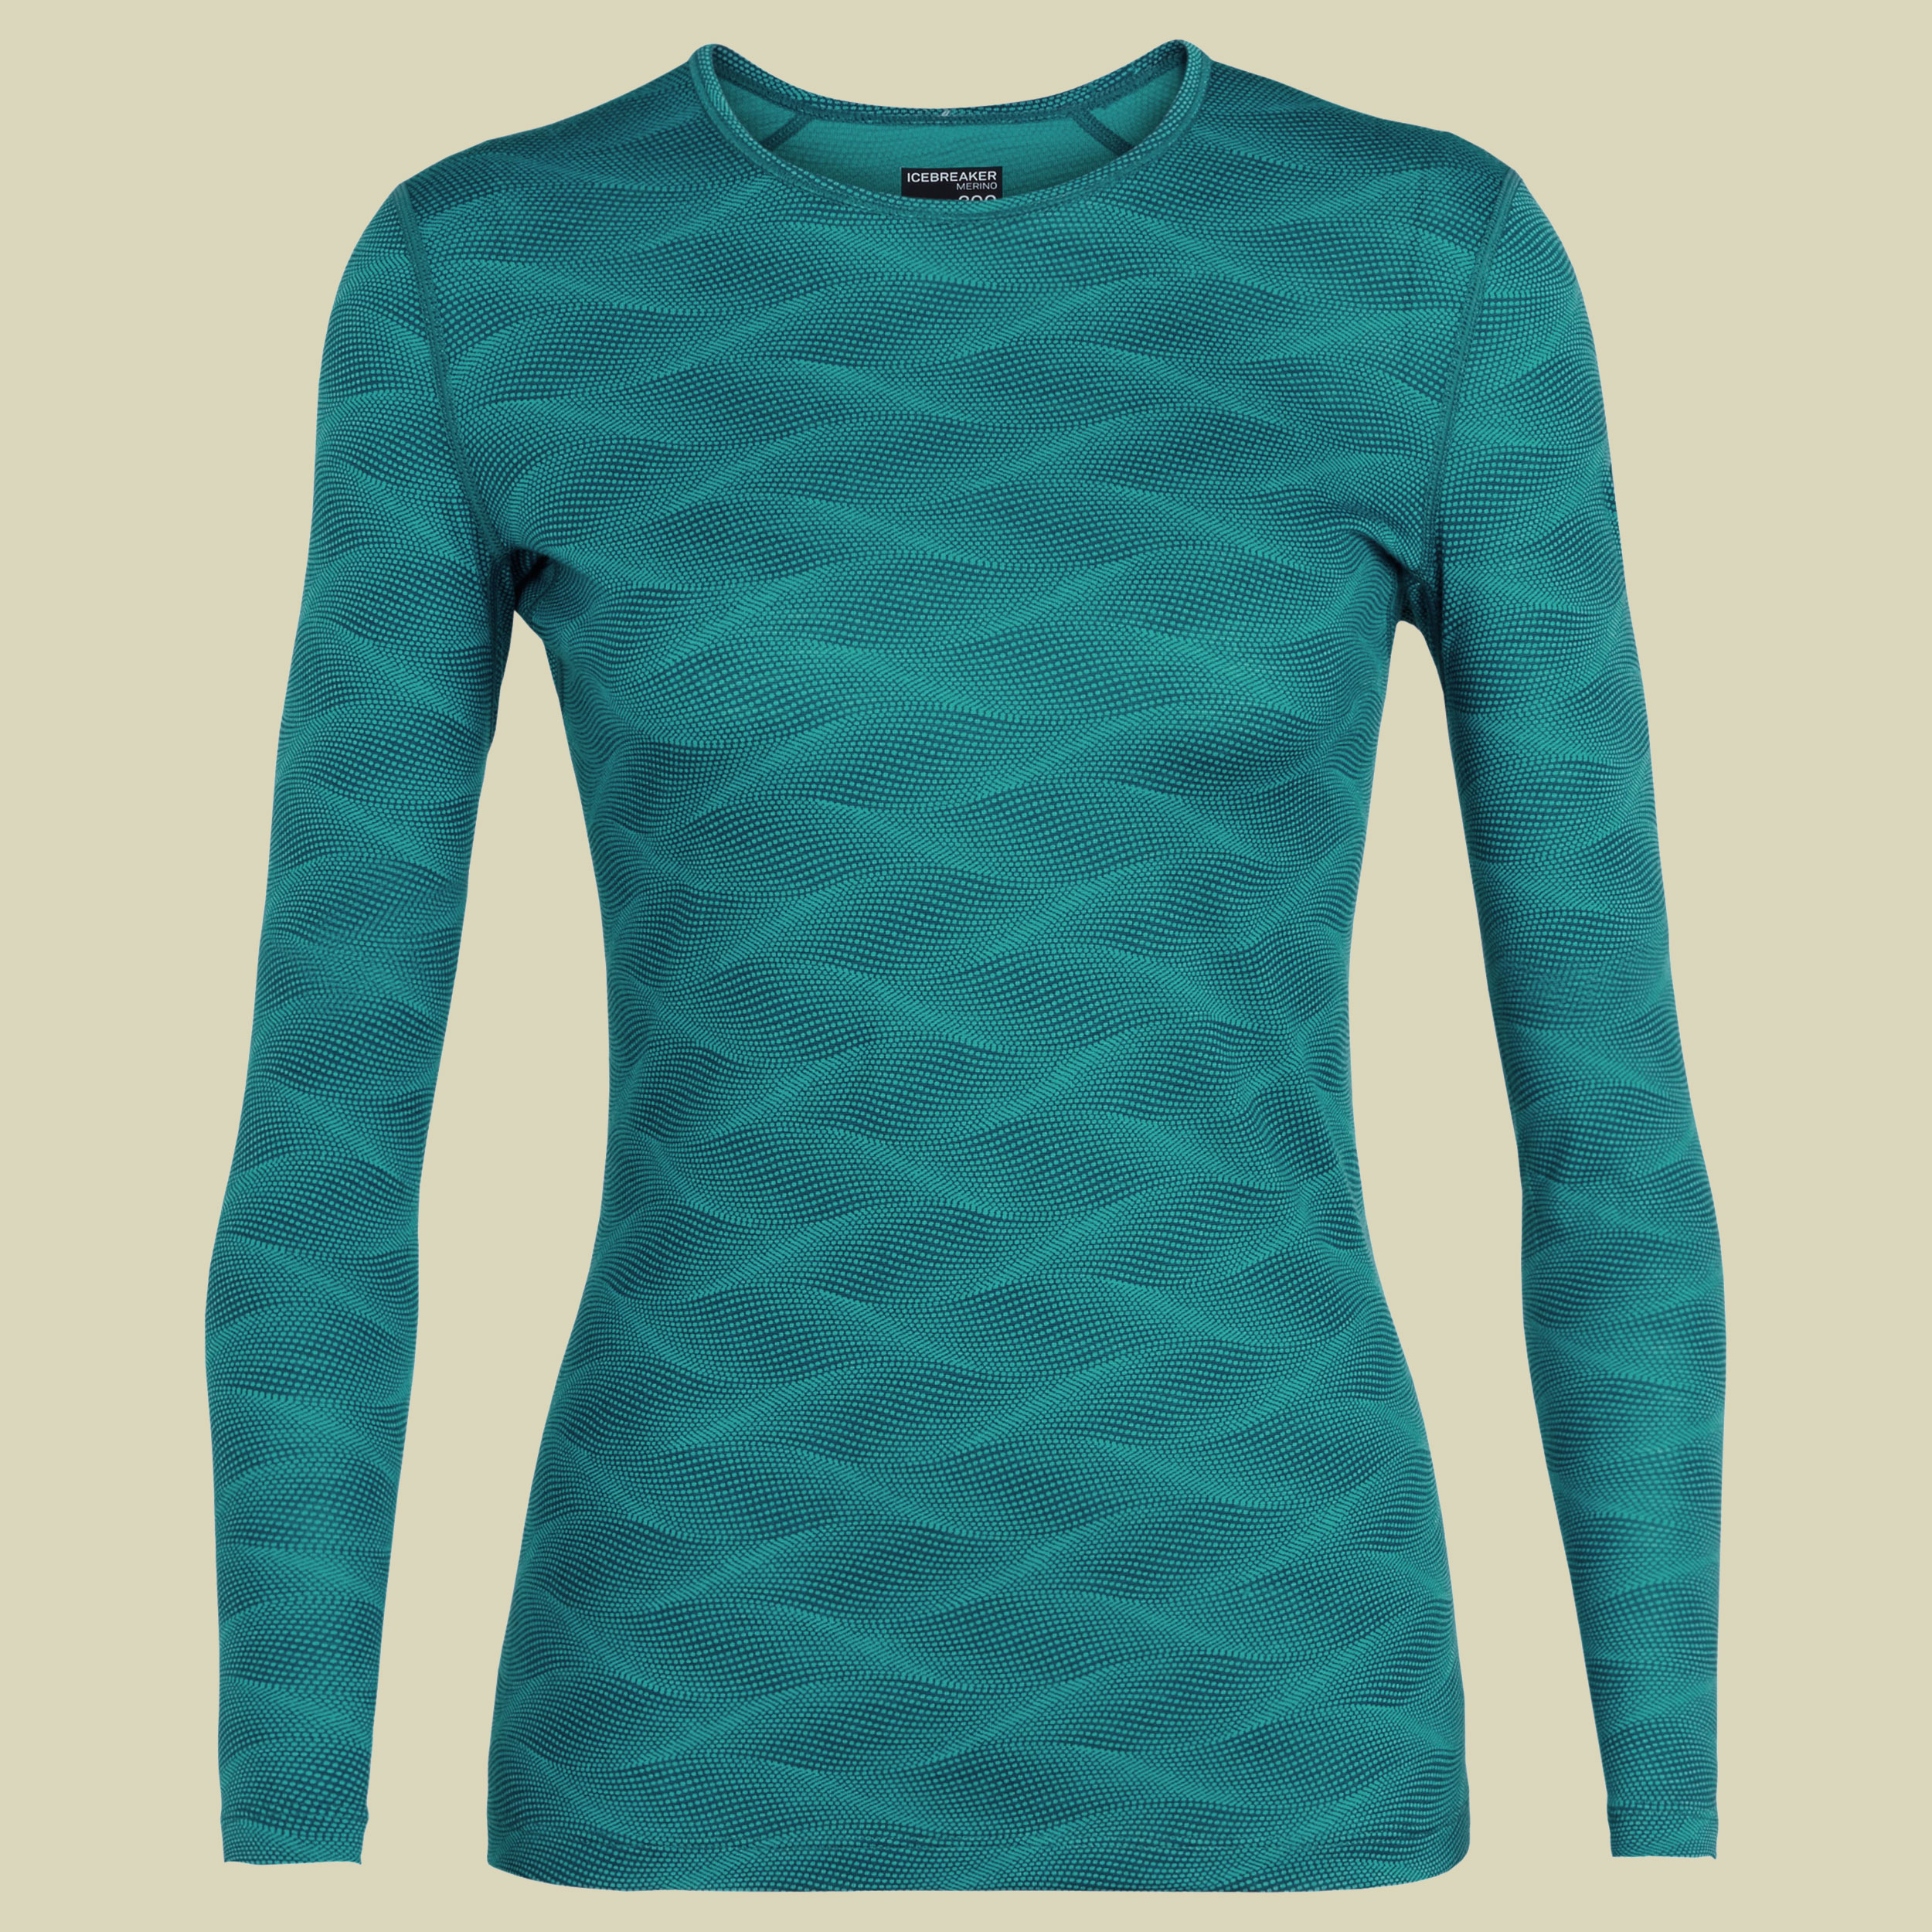 Oasis LS Crewe Curve 200 Women Größe S Farbe kingfisher/arctic teal